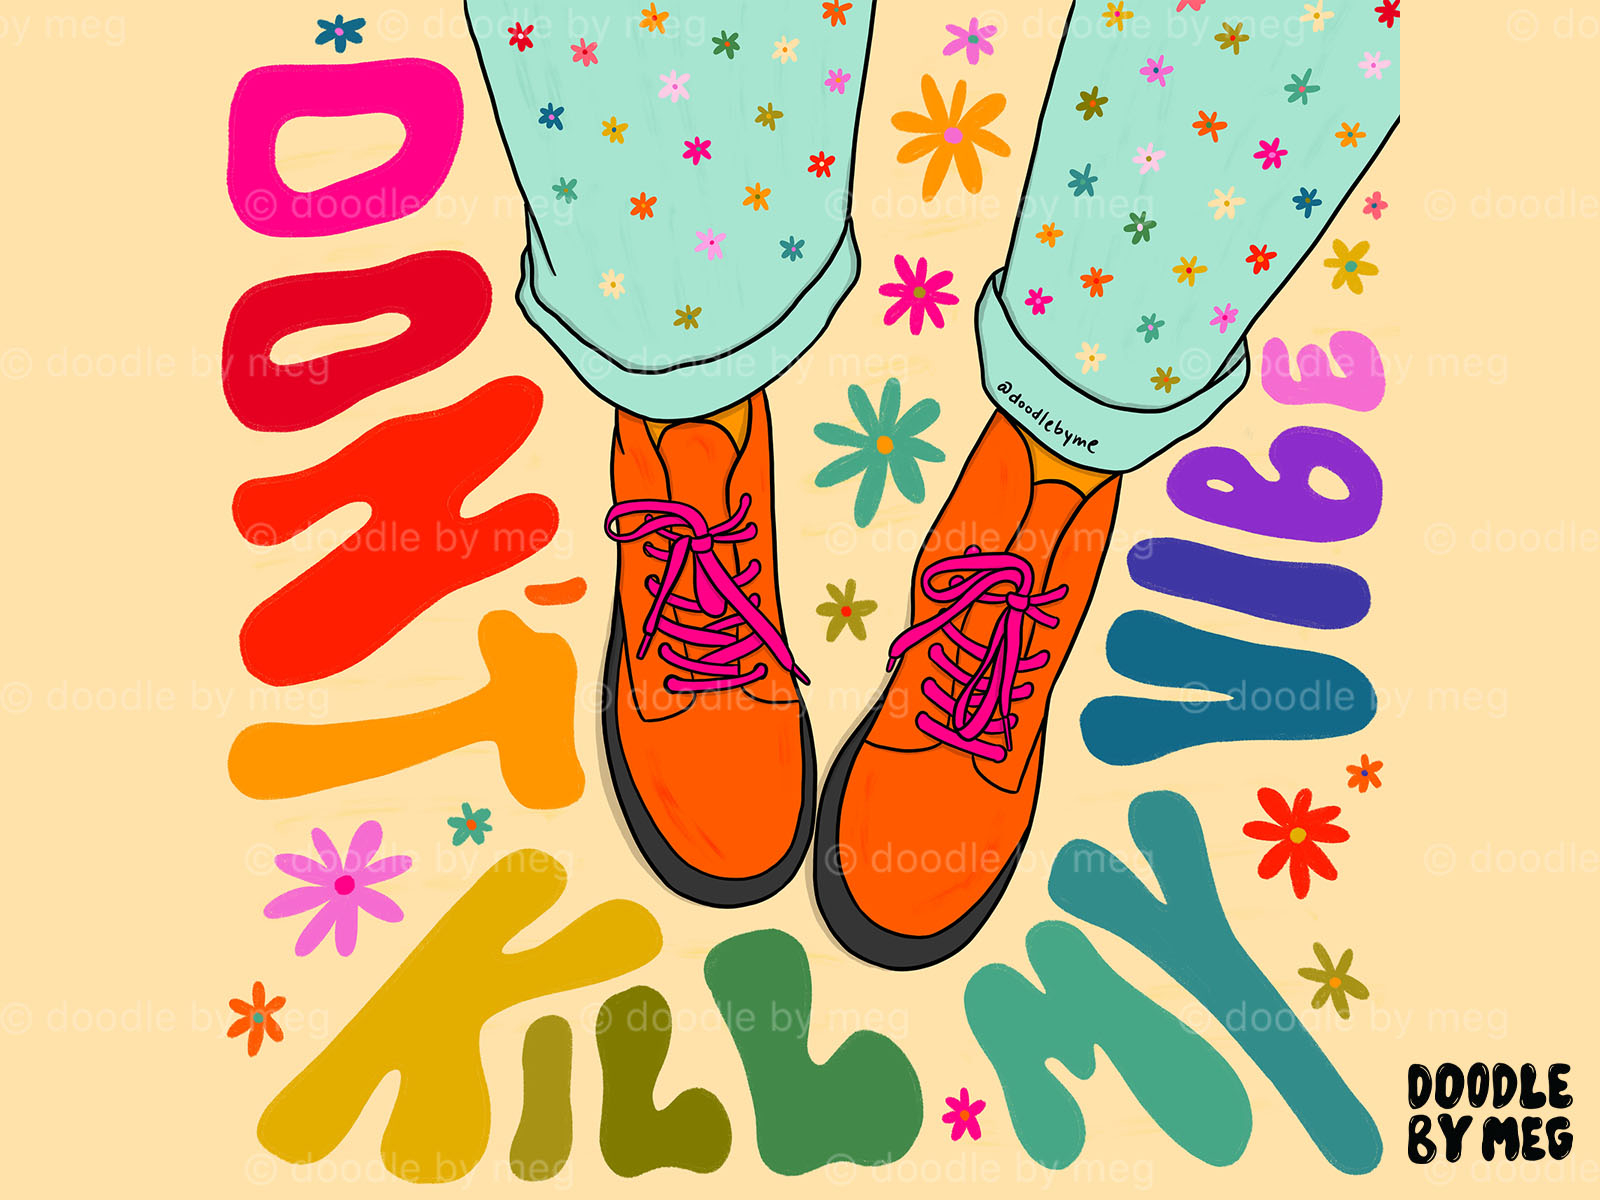 Don't Kill My Vibe boots combat boots daisies daisy design drawing fashion fashion illustration floral flower flowers illustration lettering procreate quote rainbow retro typography vintage